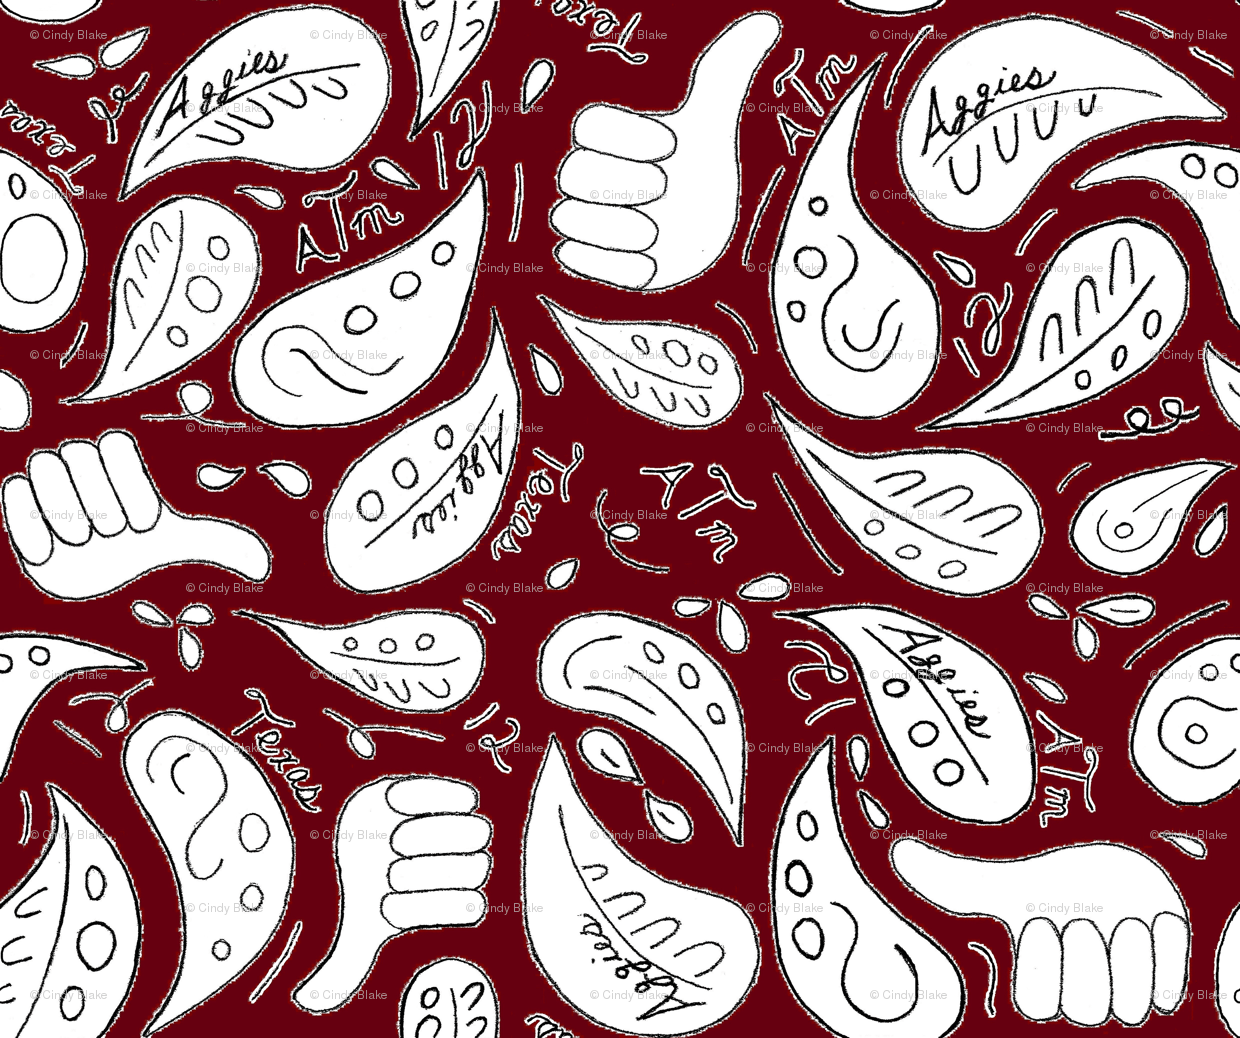 Aggie paisley maroon out wallpaper